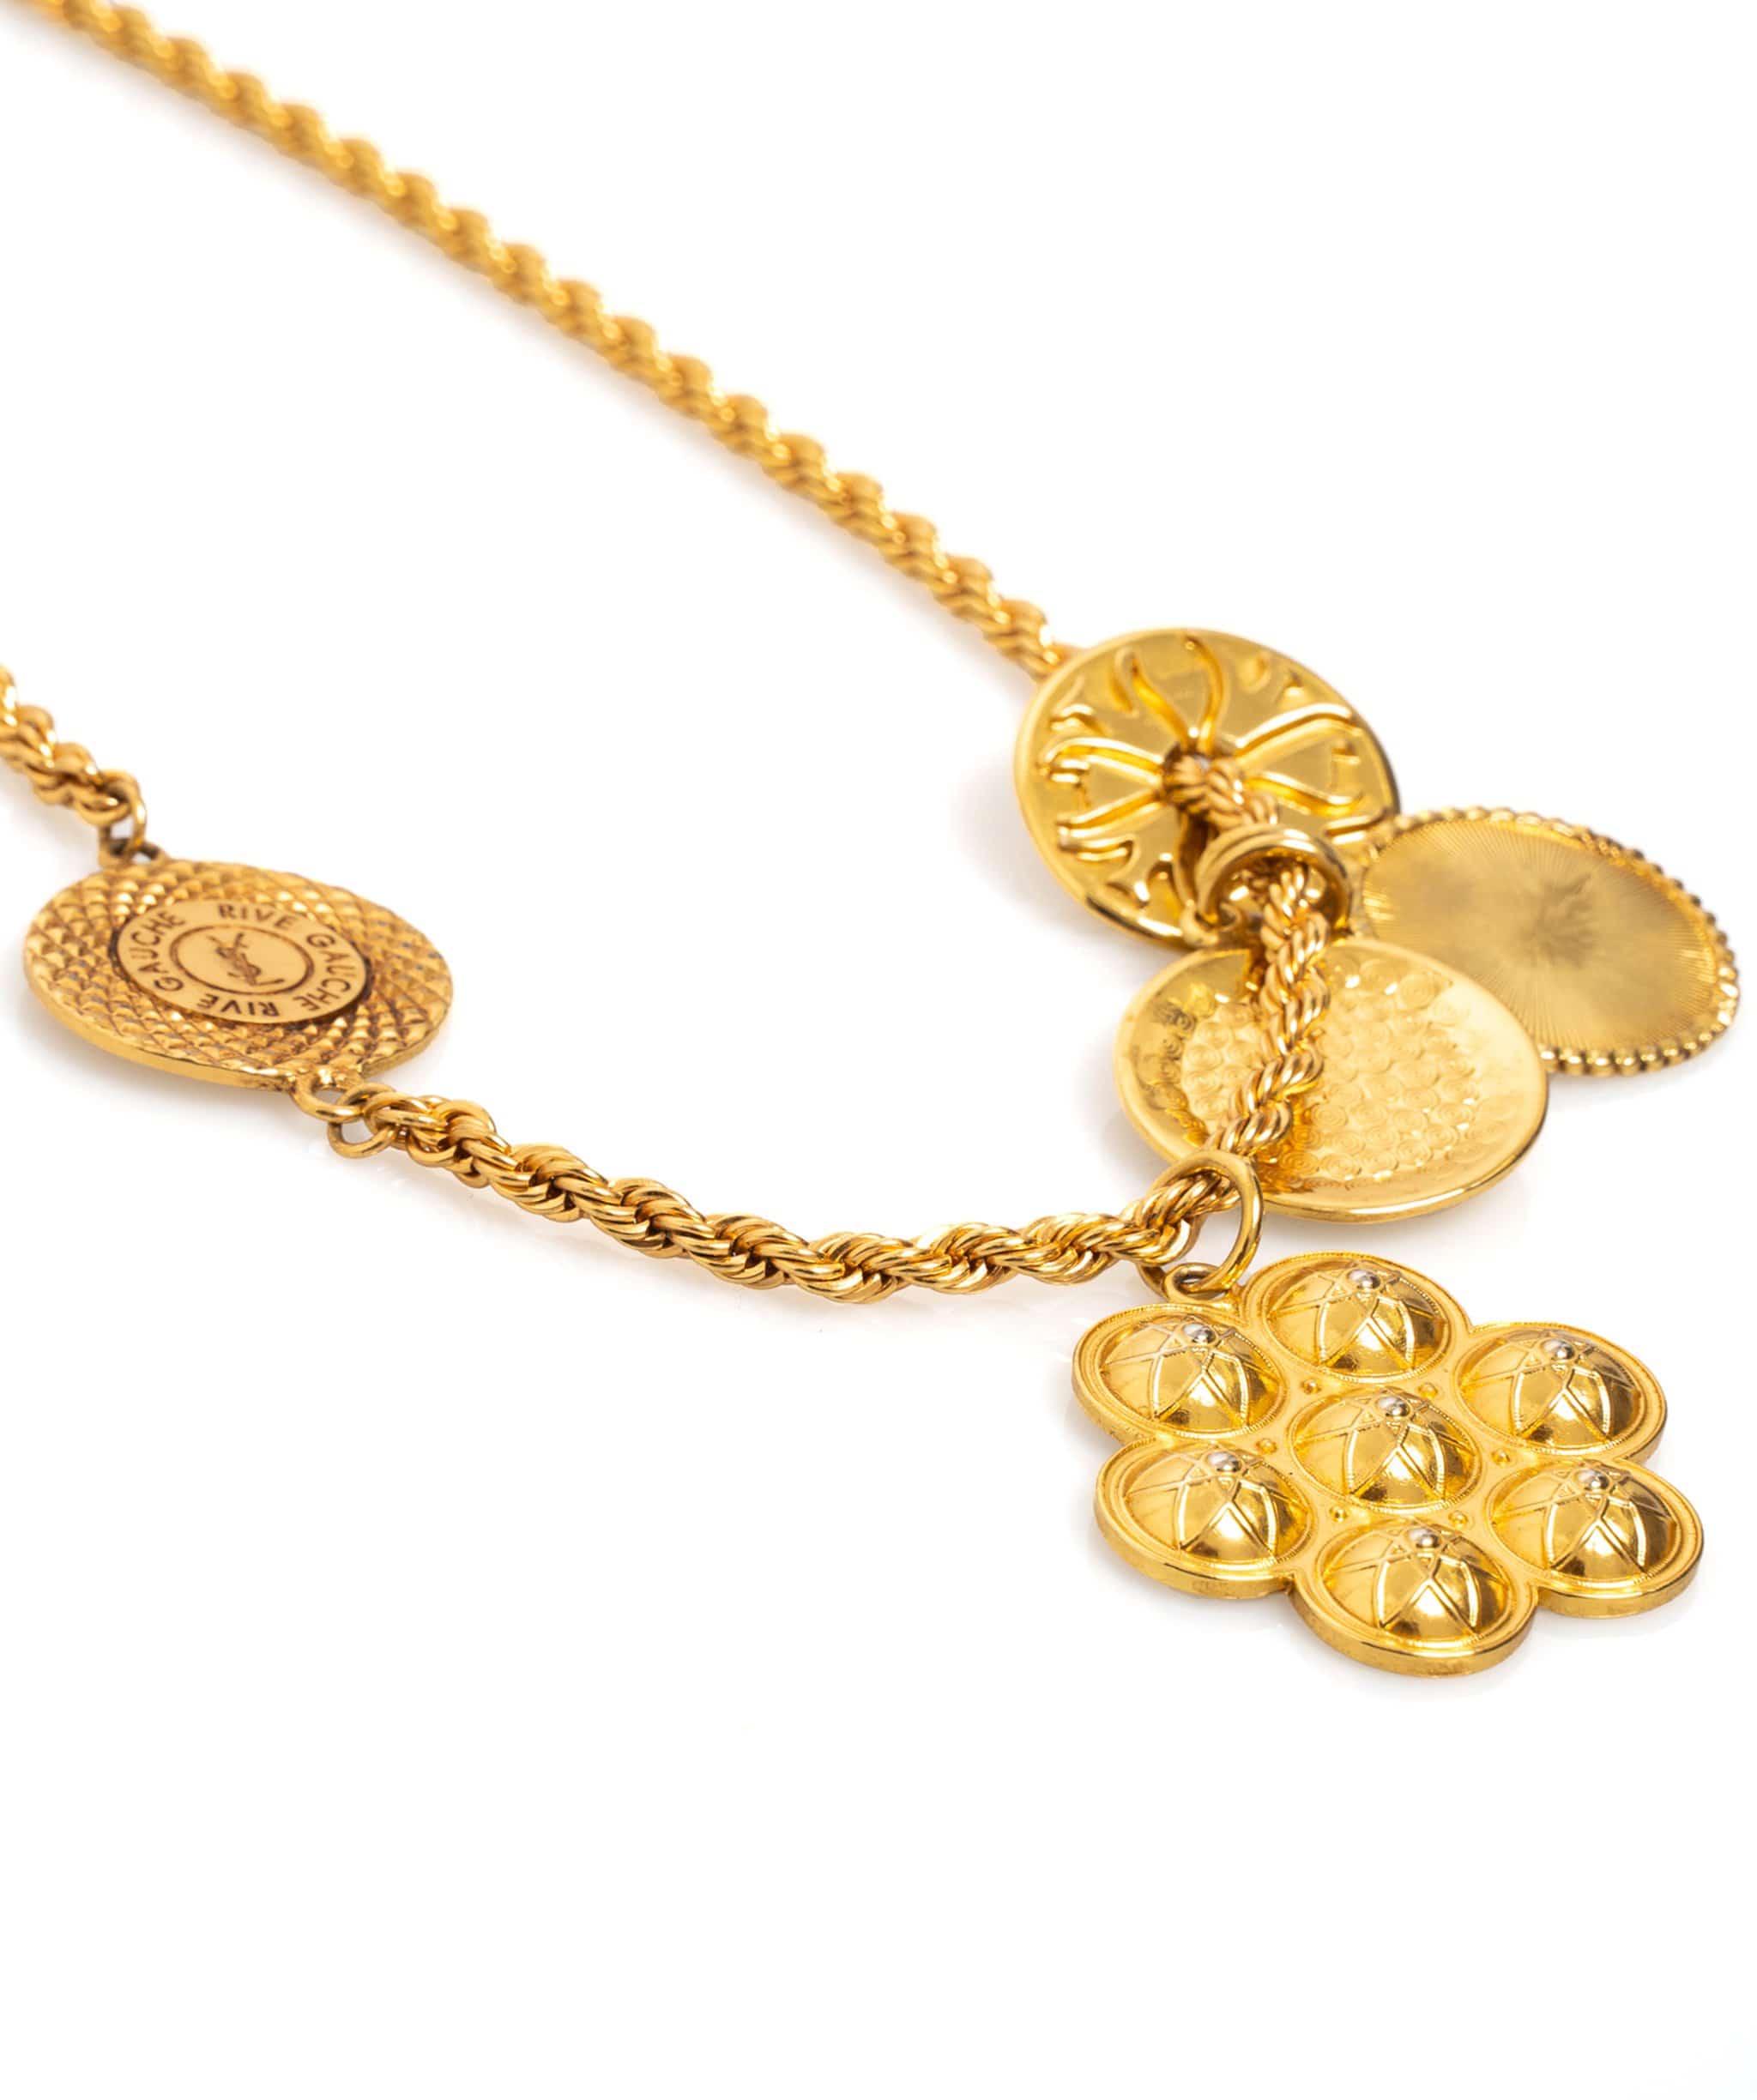 Yves Saint Laurent YSL Rive gauche Gold coin necklace - AWL1254